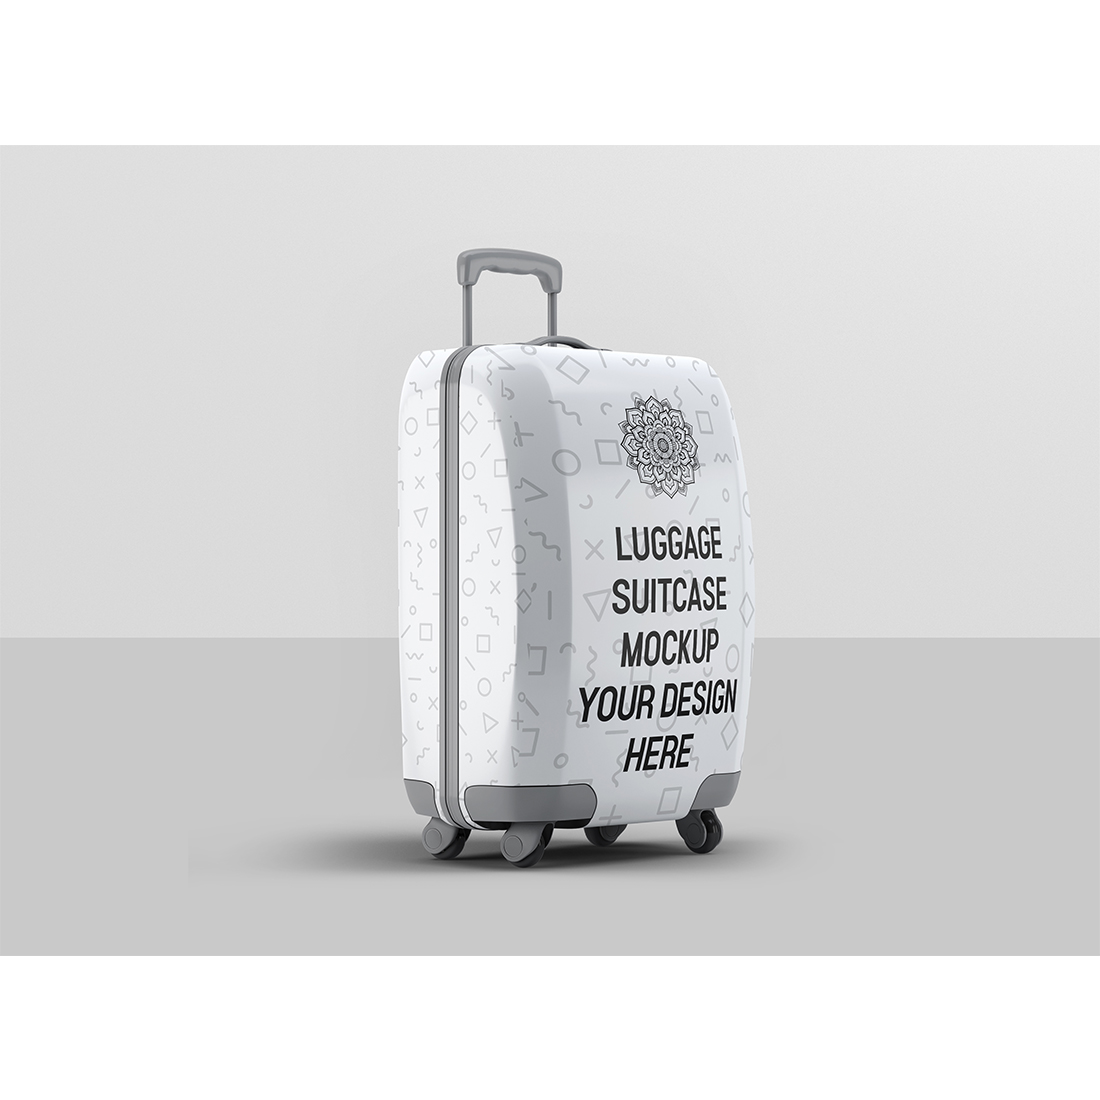 Luggage Suitcase Mockup preview image.